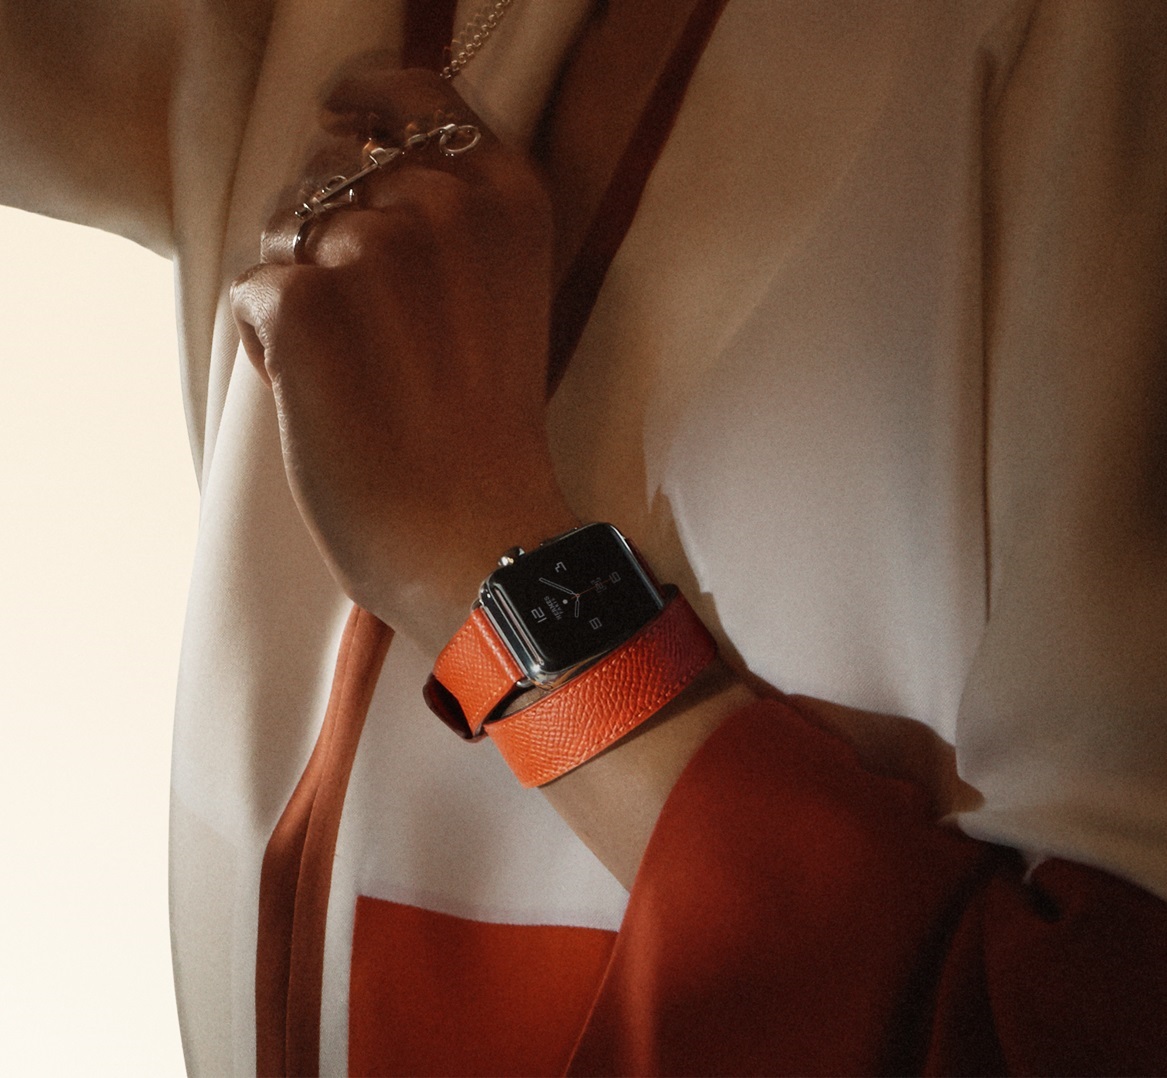 New Apple Watch Hermes Straps, Now Available Separately From Apple Watch